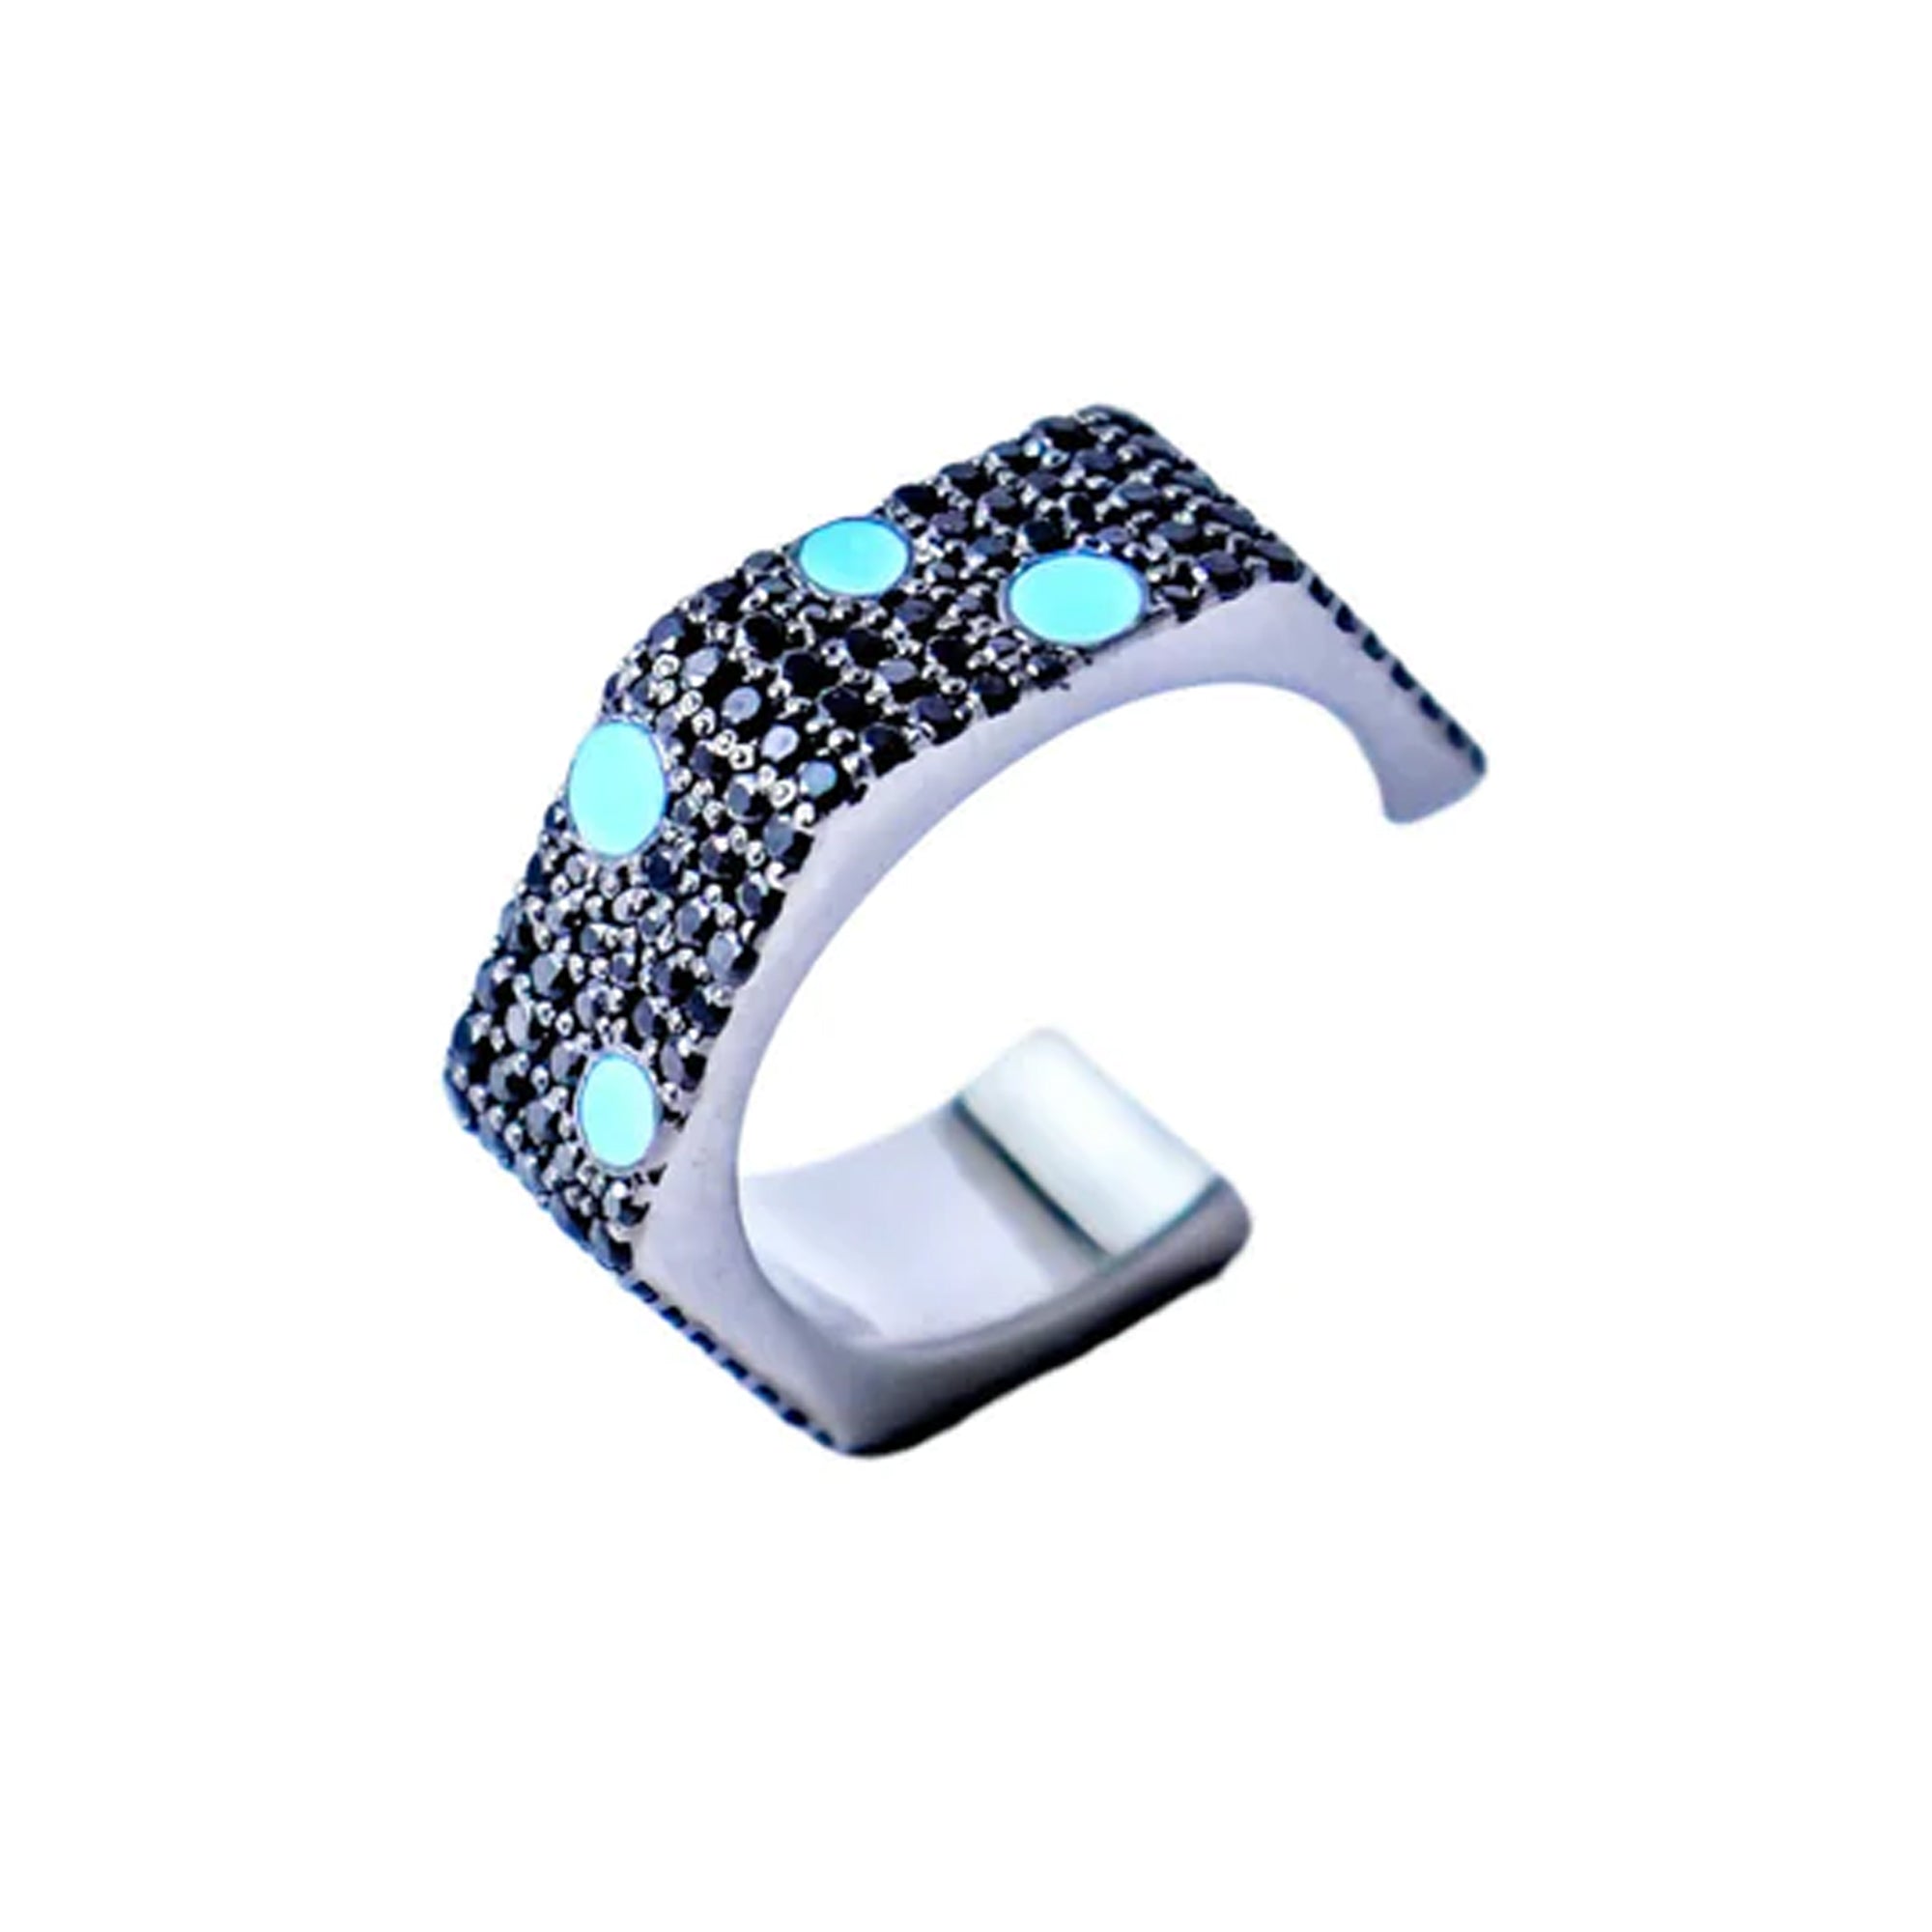 DOTTED HEX NUT RING